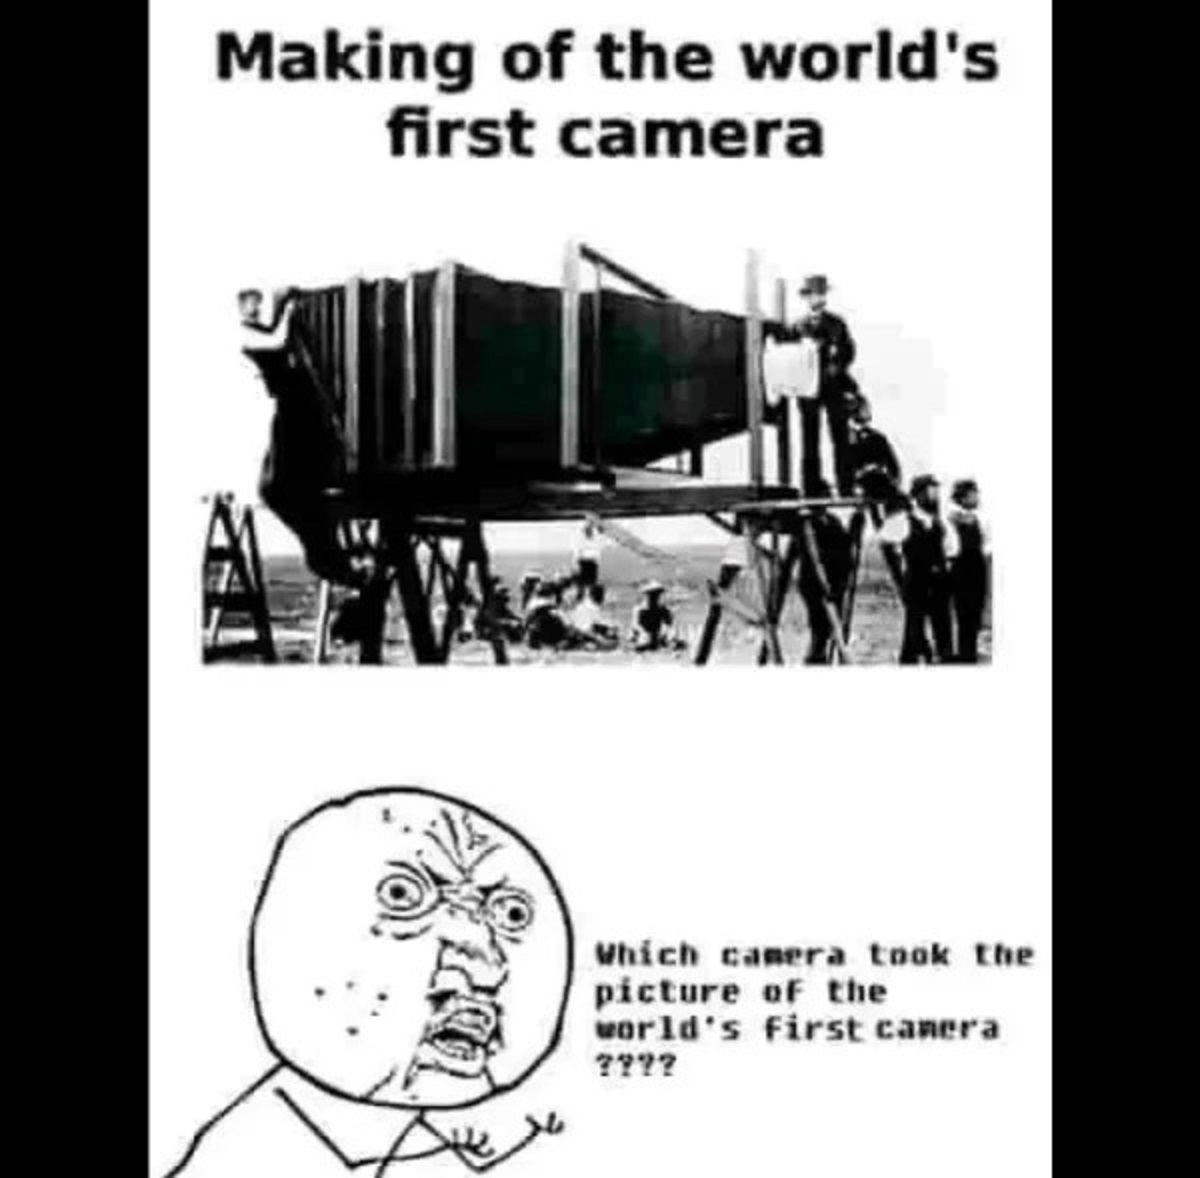 first camera meme - Making of the world's first camera Which camera took the picture of the world's first camera ????